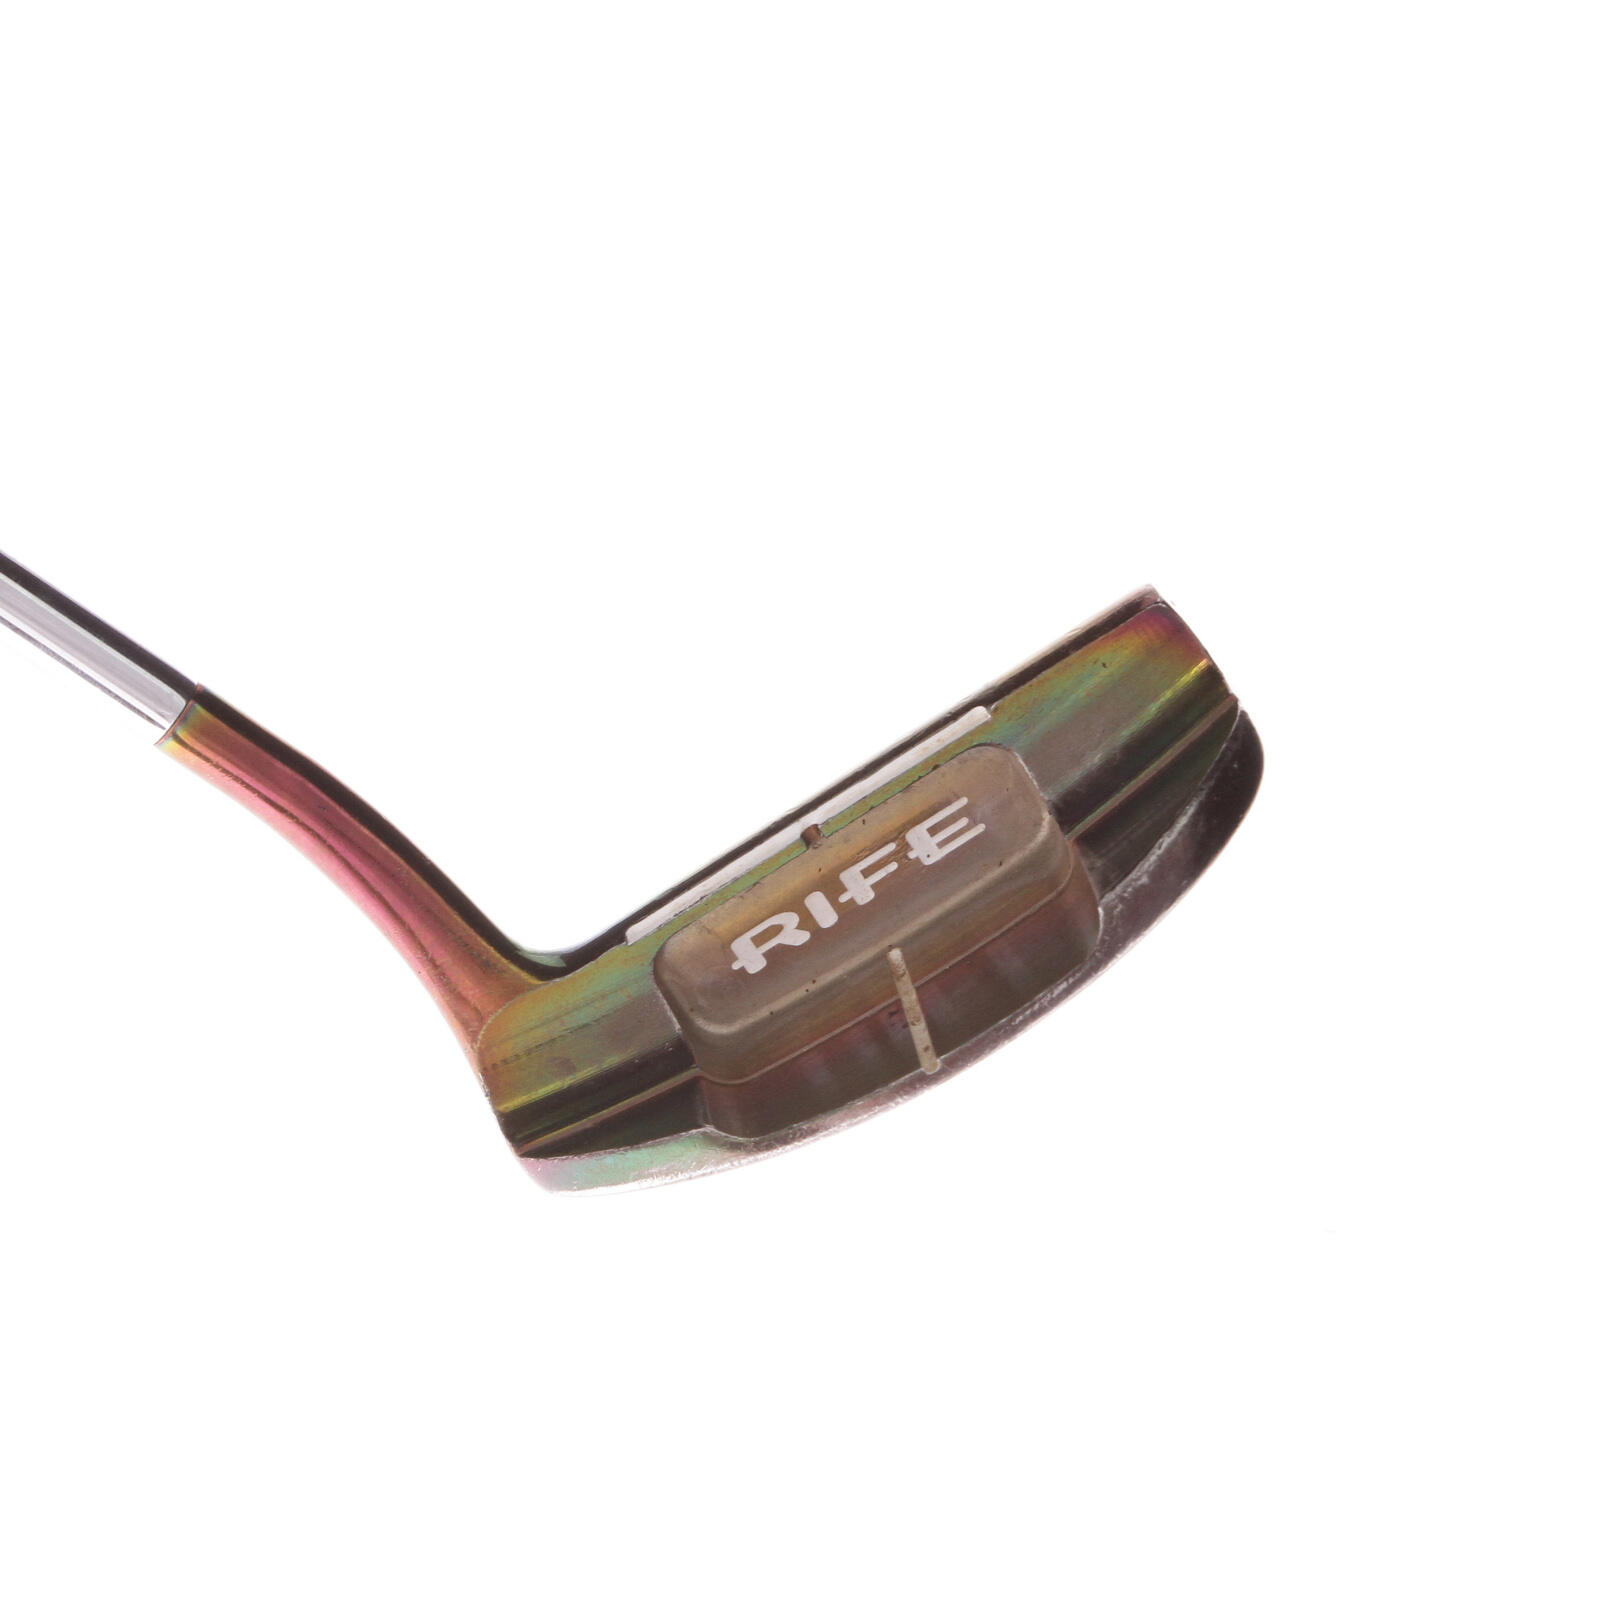 USED - Rife Abaco Putter 31 Inches Length Steel Shaft Right Handed - GRADE B 4/6